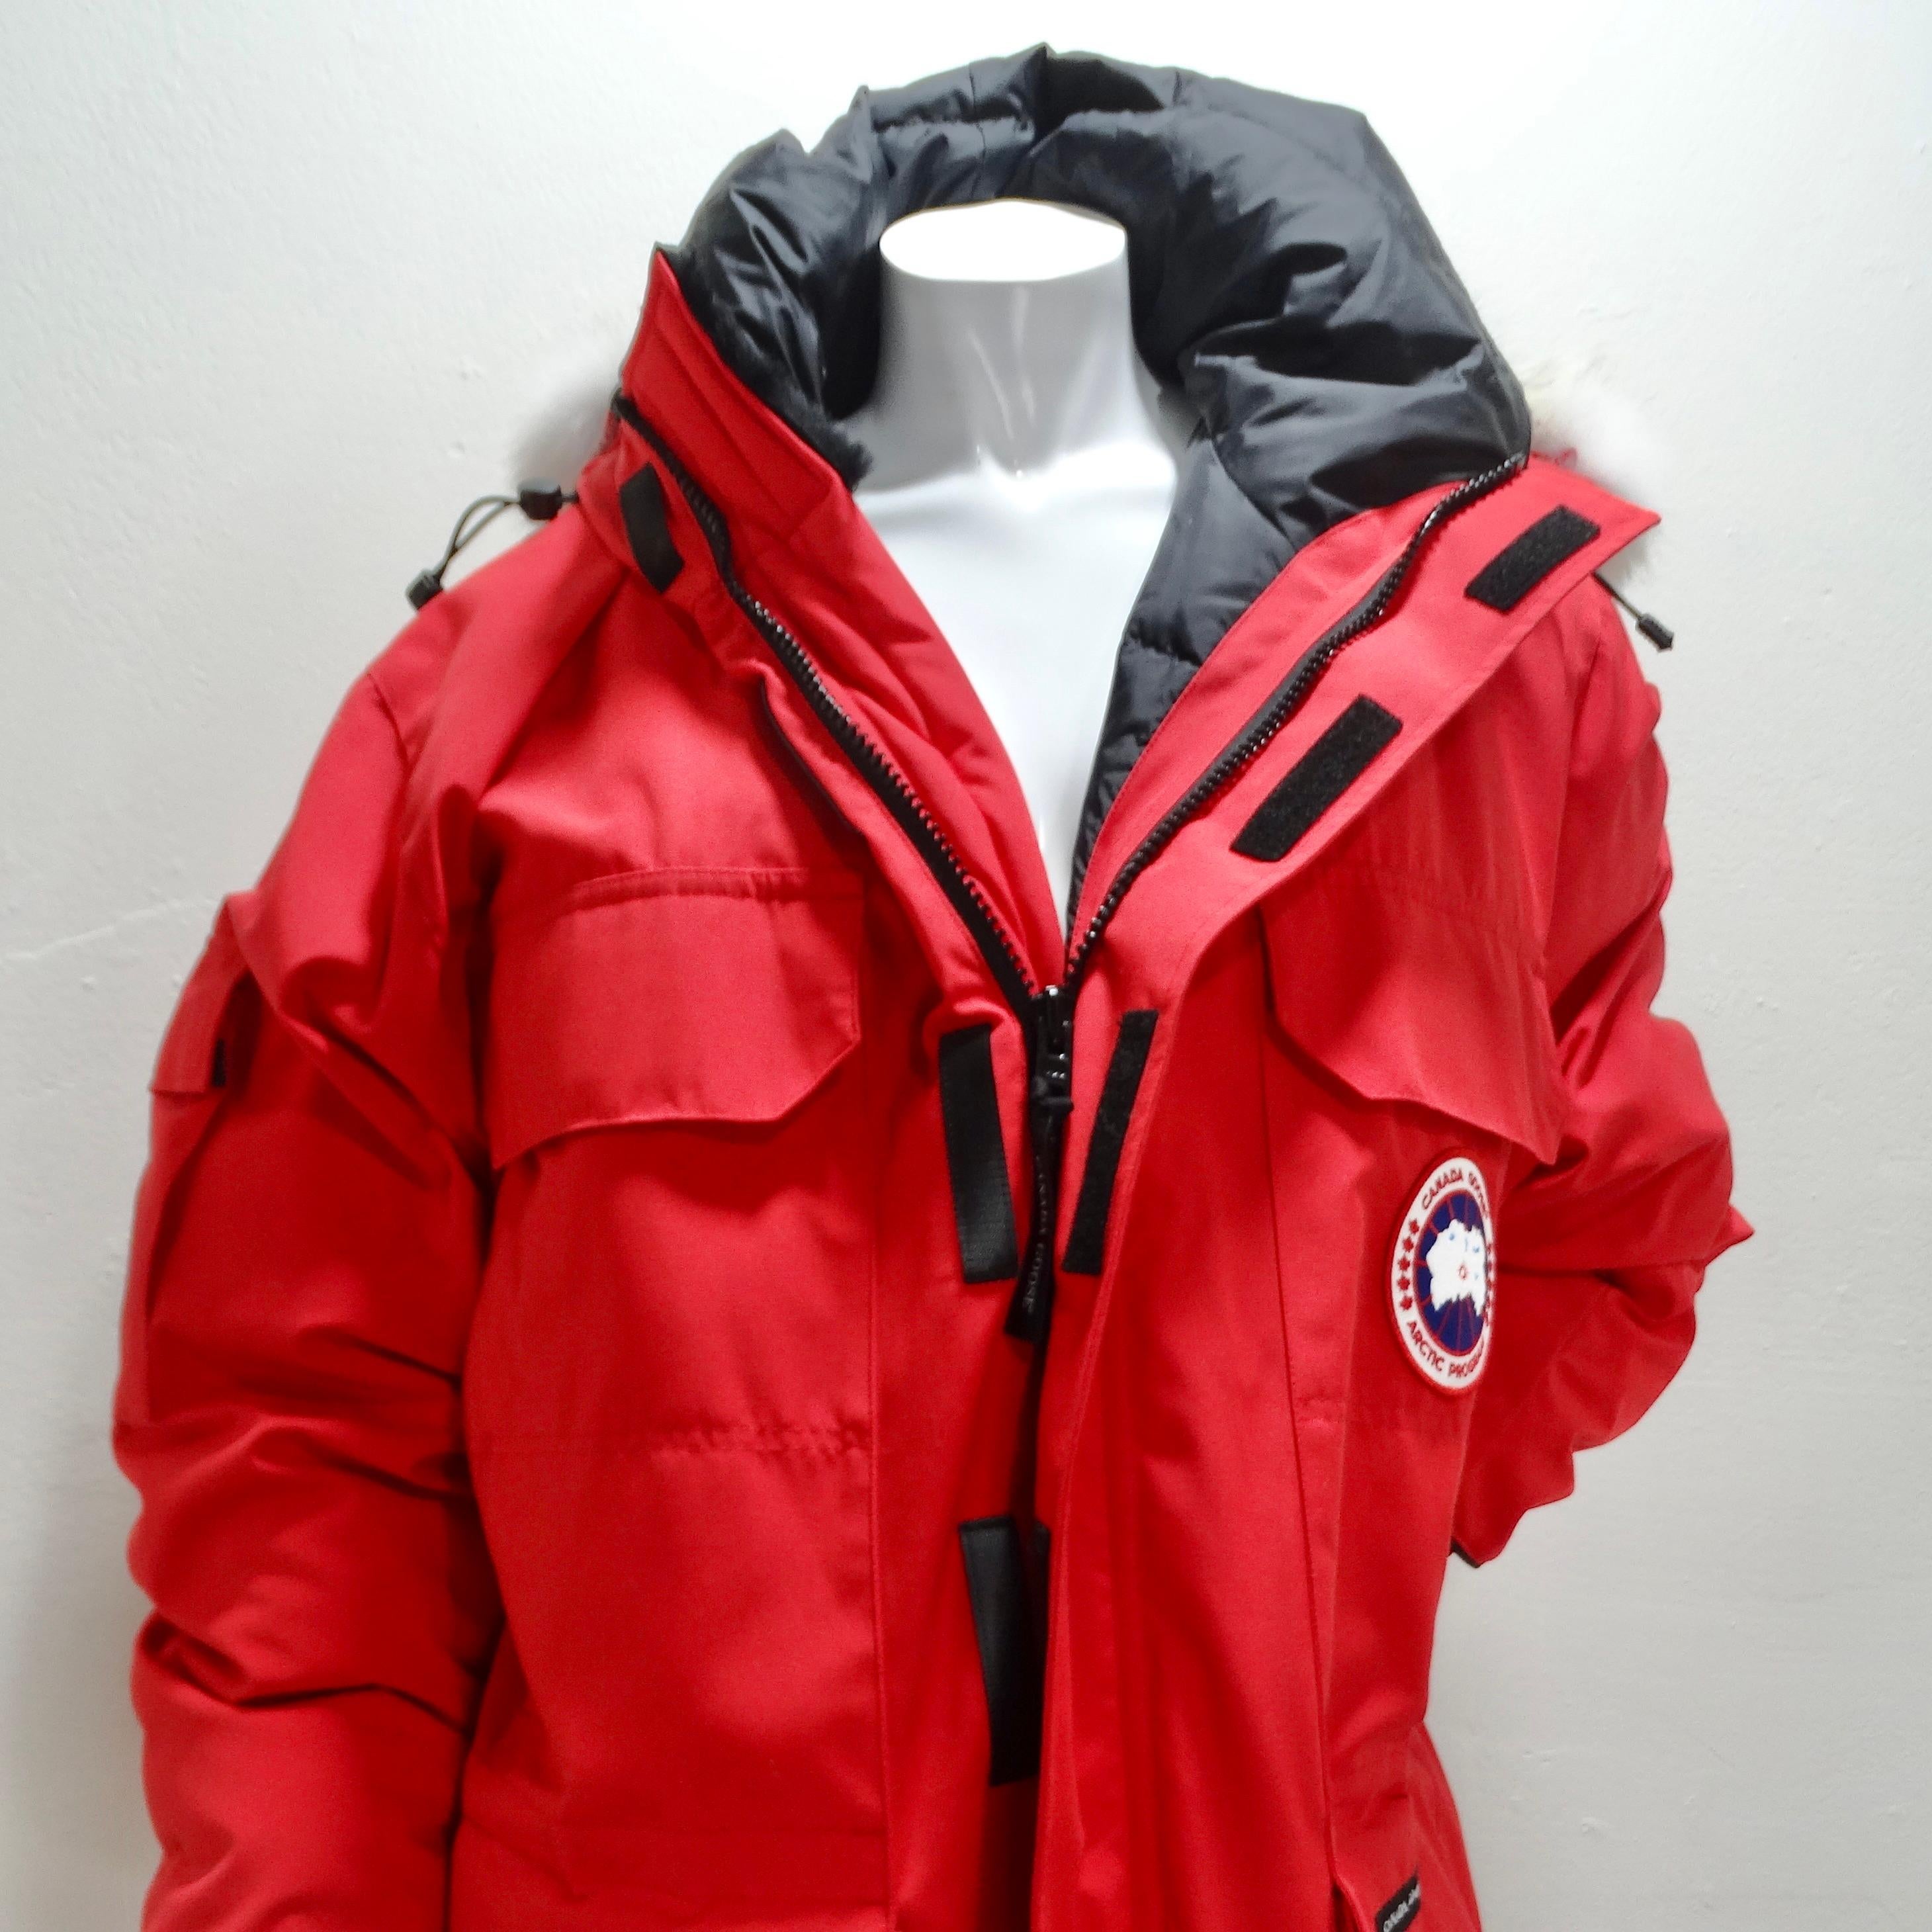 Introducing the Canada Goose Expedition Hooded Parka - your key to unbeatable warmth and style! Crafted by Canada Goose, the Expedition Parka is your go-to choice for all adventures. Designed to keep you cozy in the harshest of conditions, the